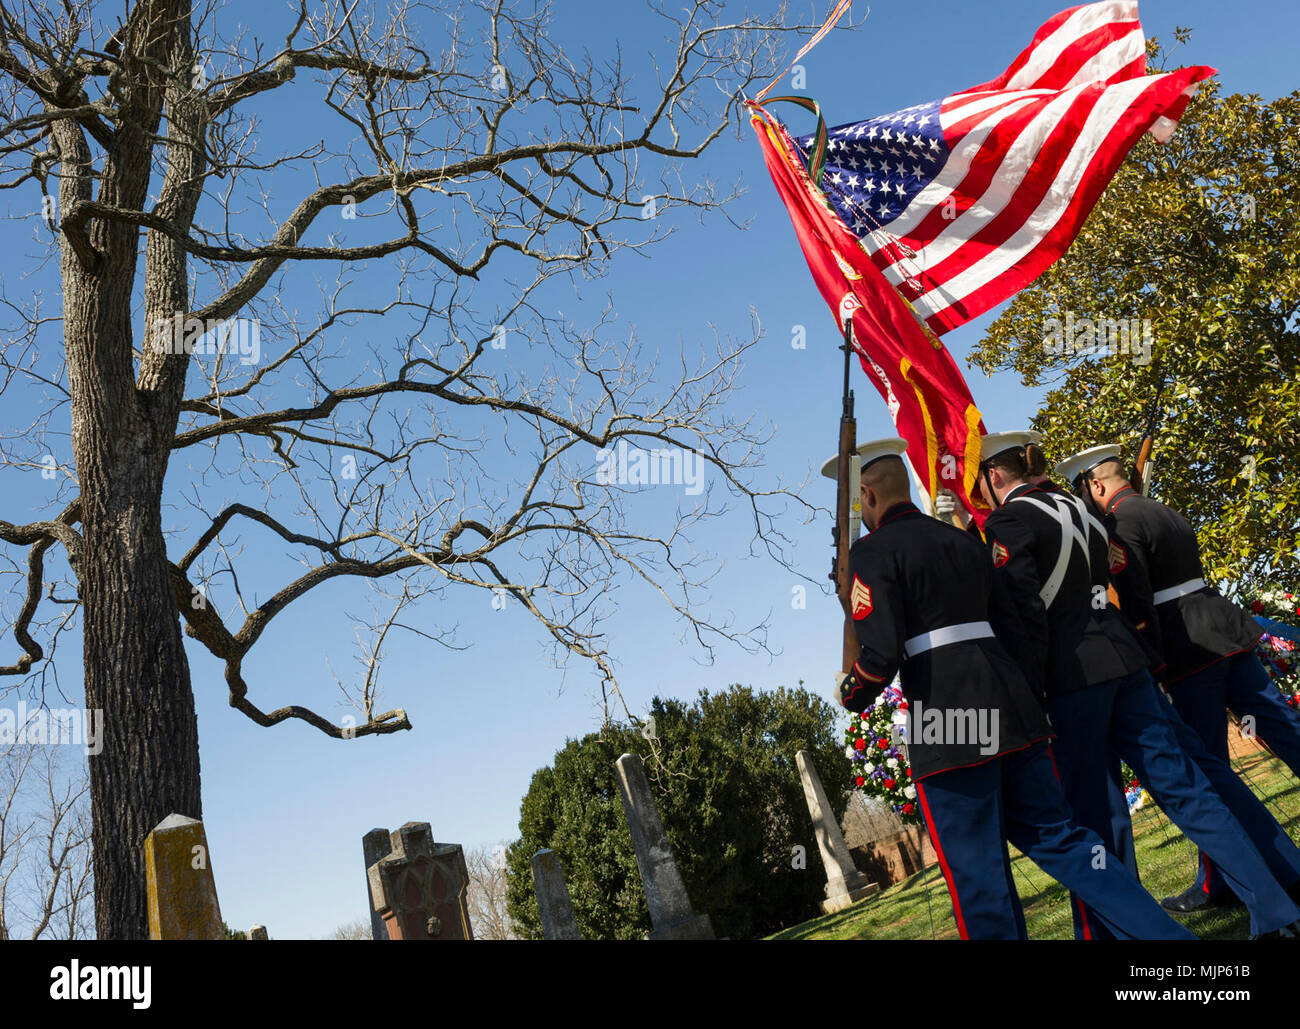 U.S. Marines with Marine Corps Base Quantico Color Guard march on the colors for the Presidential wreath laying ceremony held to honor the 4th President of the United States, James Madison, also known as the Father of the Constitution, at his home at Montpelier, Orange, Va., March 16, 2018. This event was held in commemoration of the 267th anniversary of the birth of Madison, born in 1751, and has also been decreed as James Madison Appreciation Day for the Commonwealth of Virginia. Armed Forces and civilians displaying courage bravery dedication commitment and sacrifice Stock Photo